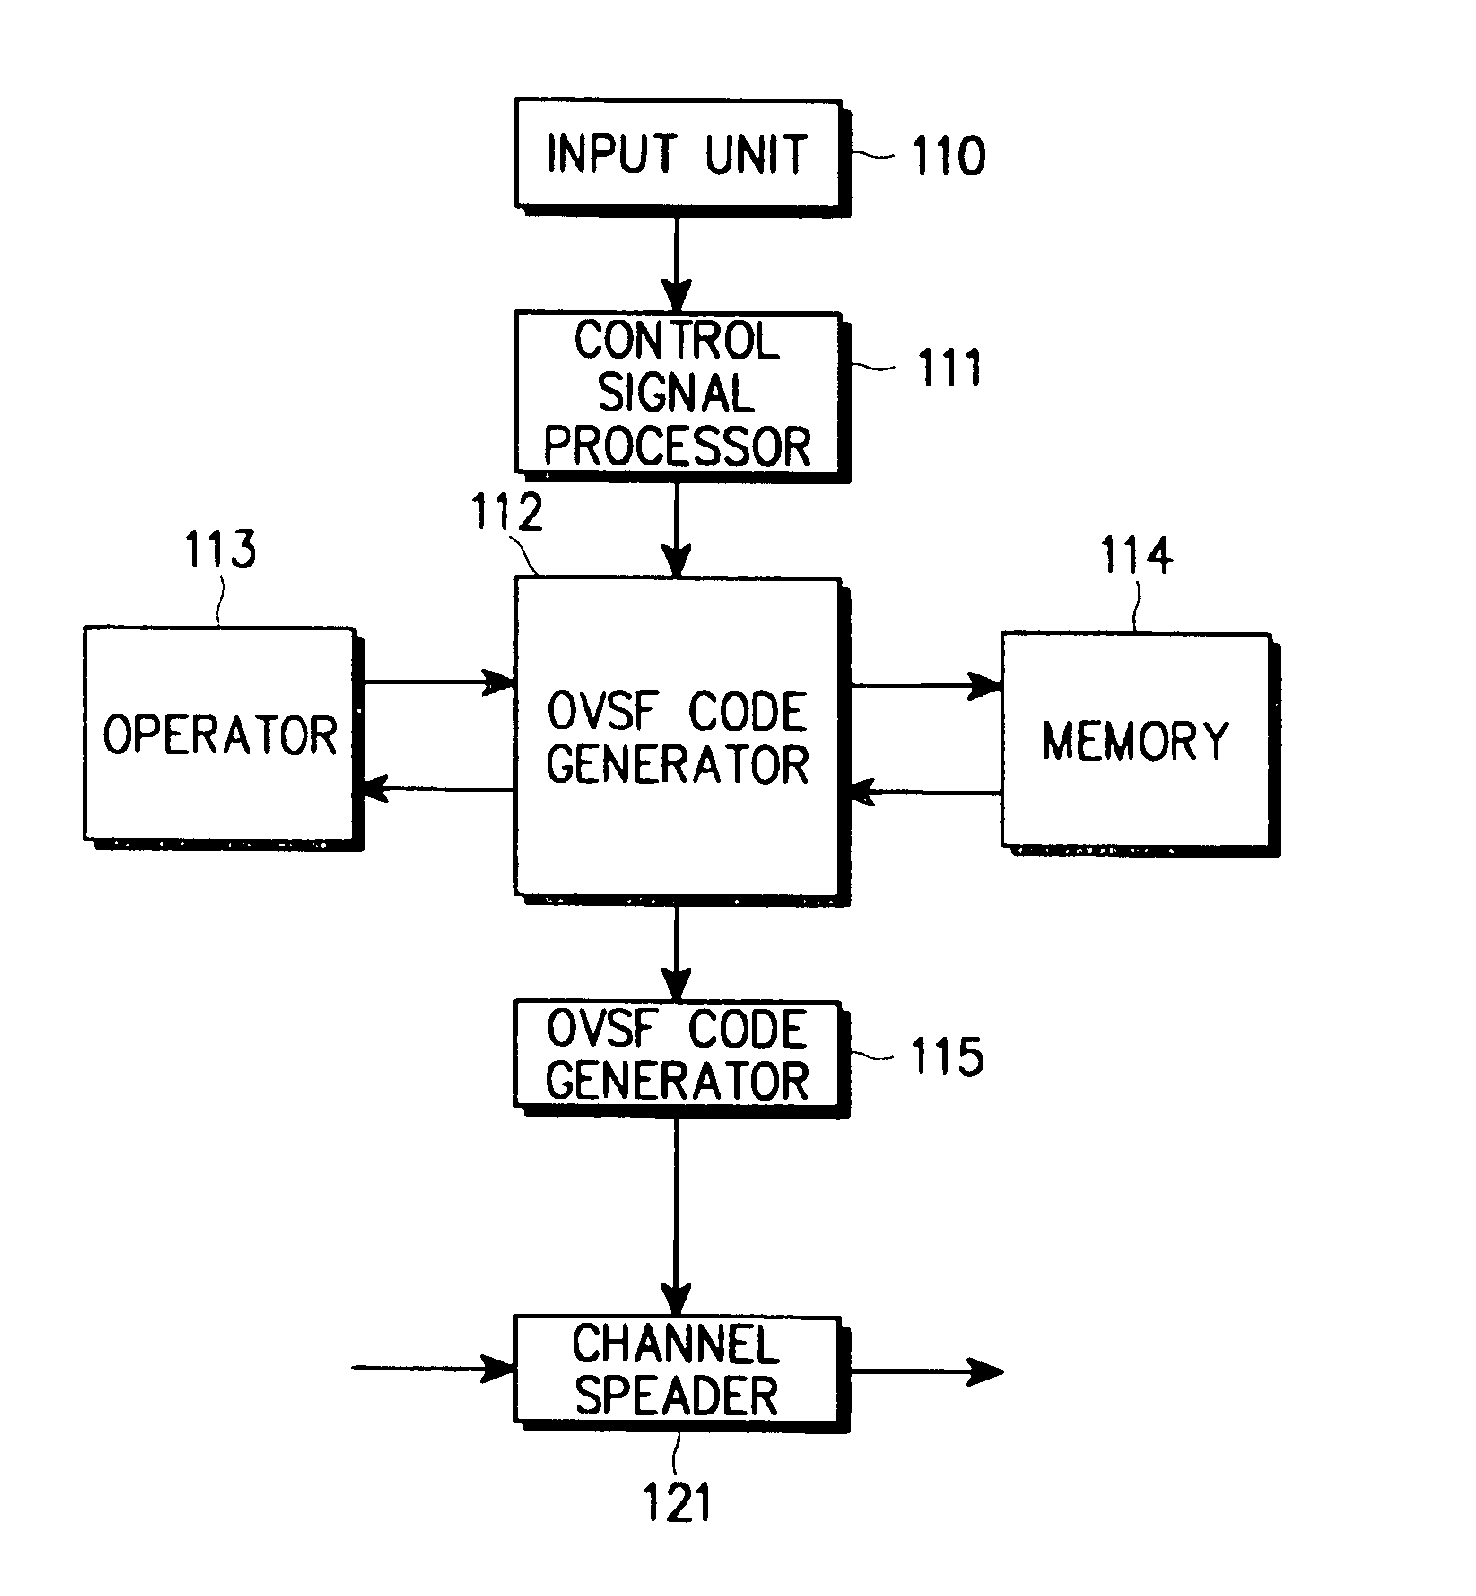 Apparatus and method for allocating channel using OVSF code for uplink synchronous transmission scheme in a W-CDMA communication system